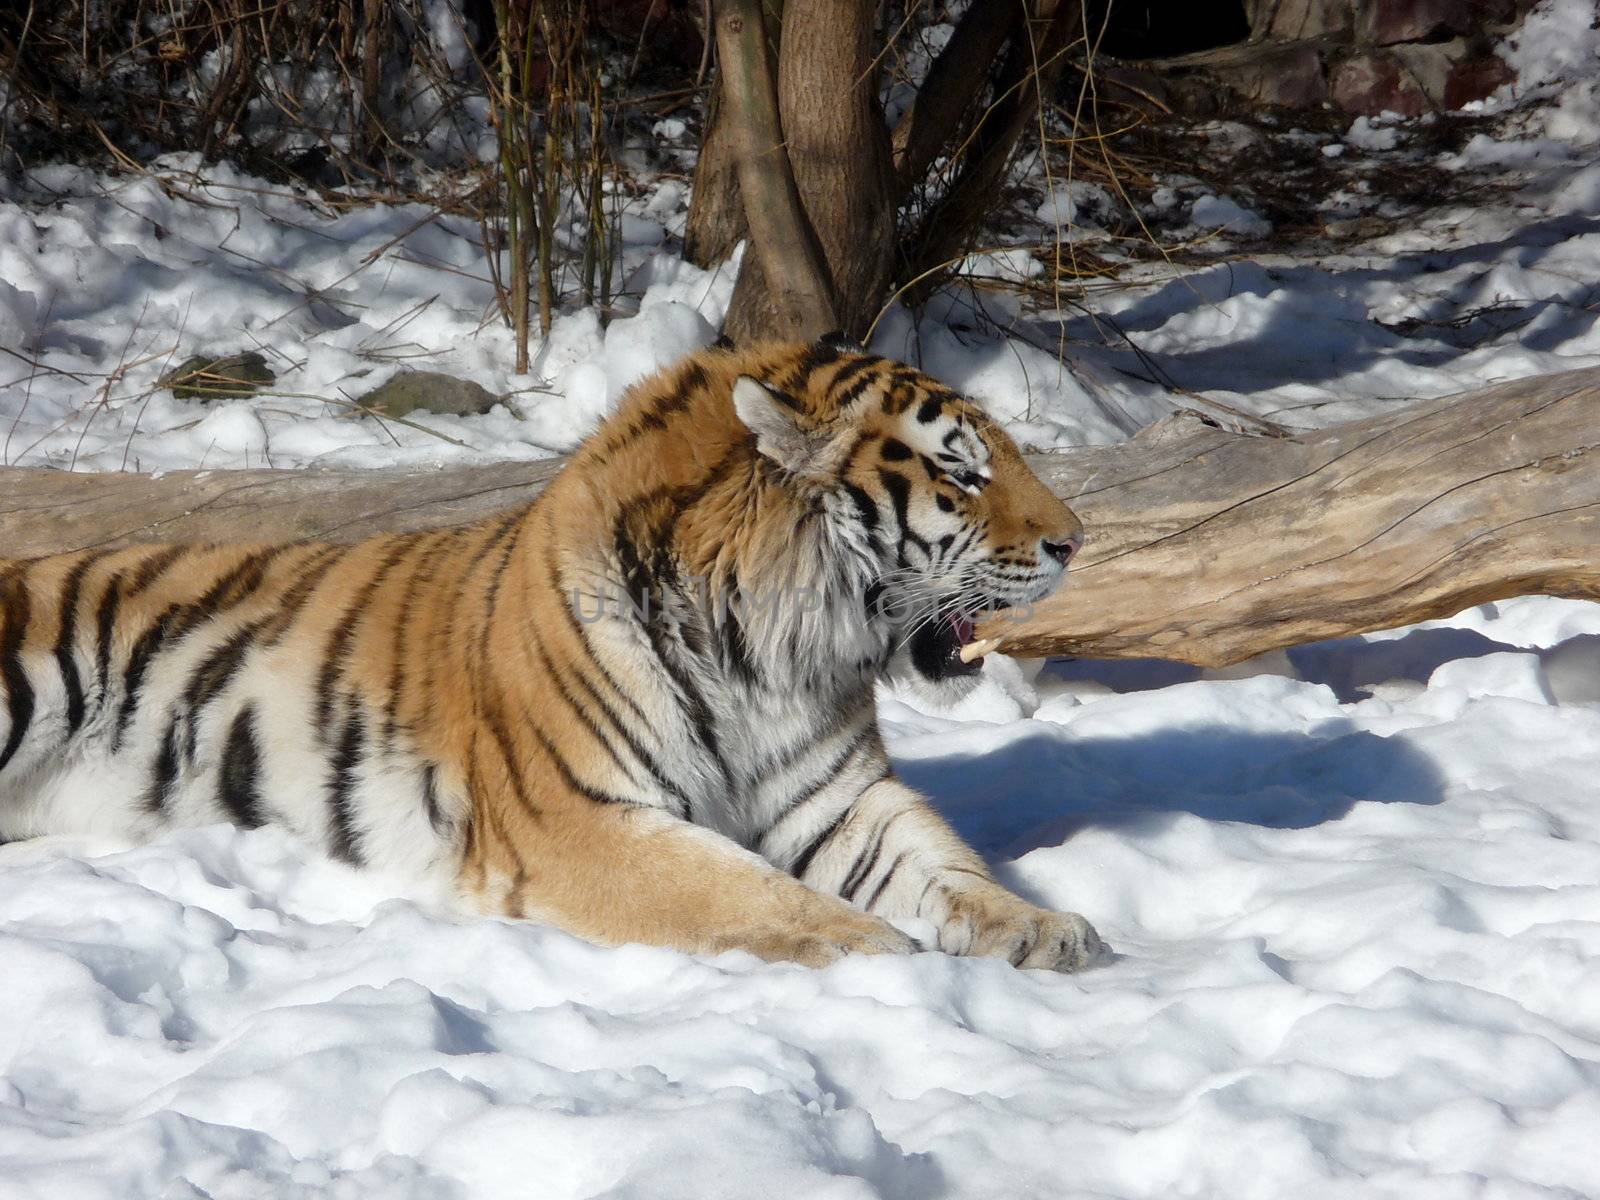 Strong tiger lays on the snow ground